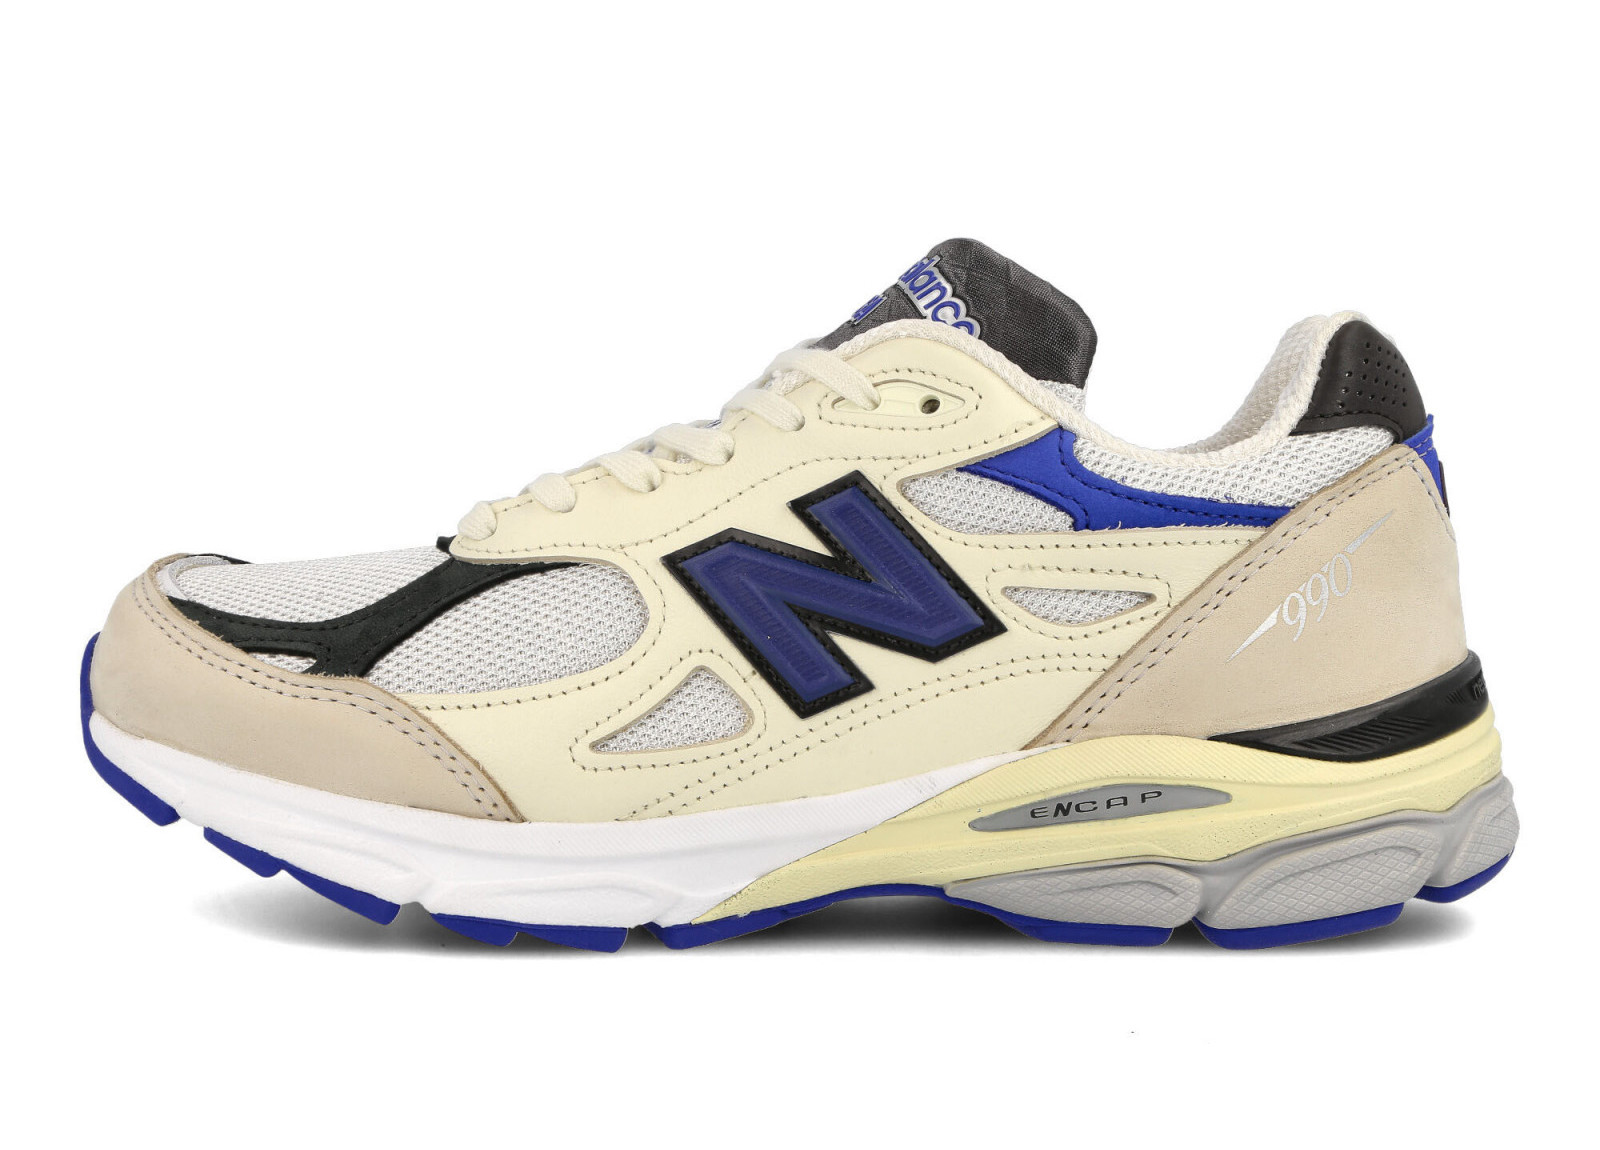 New Balance M990WB3
Made in USA
White / Blue